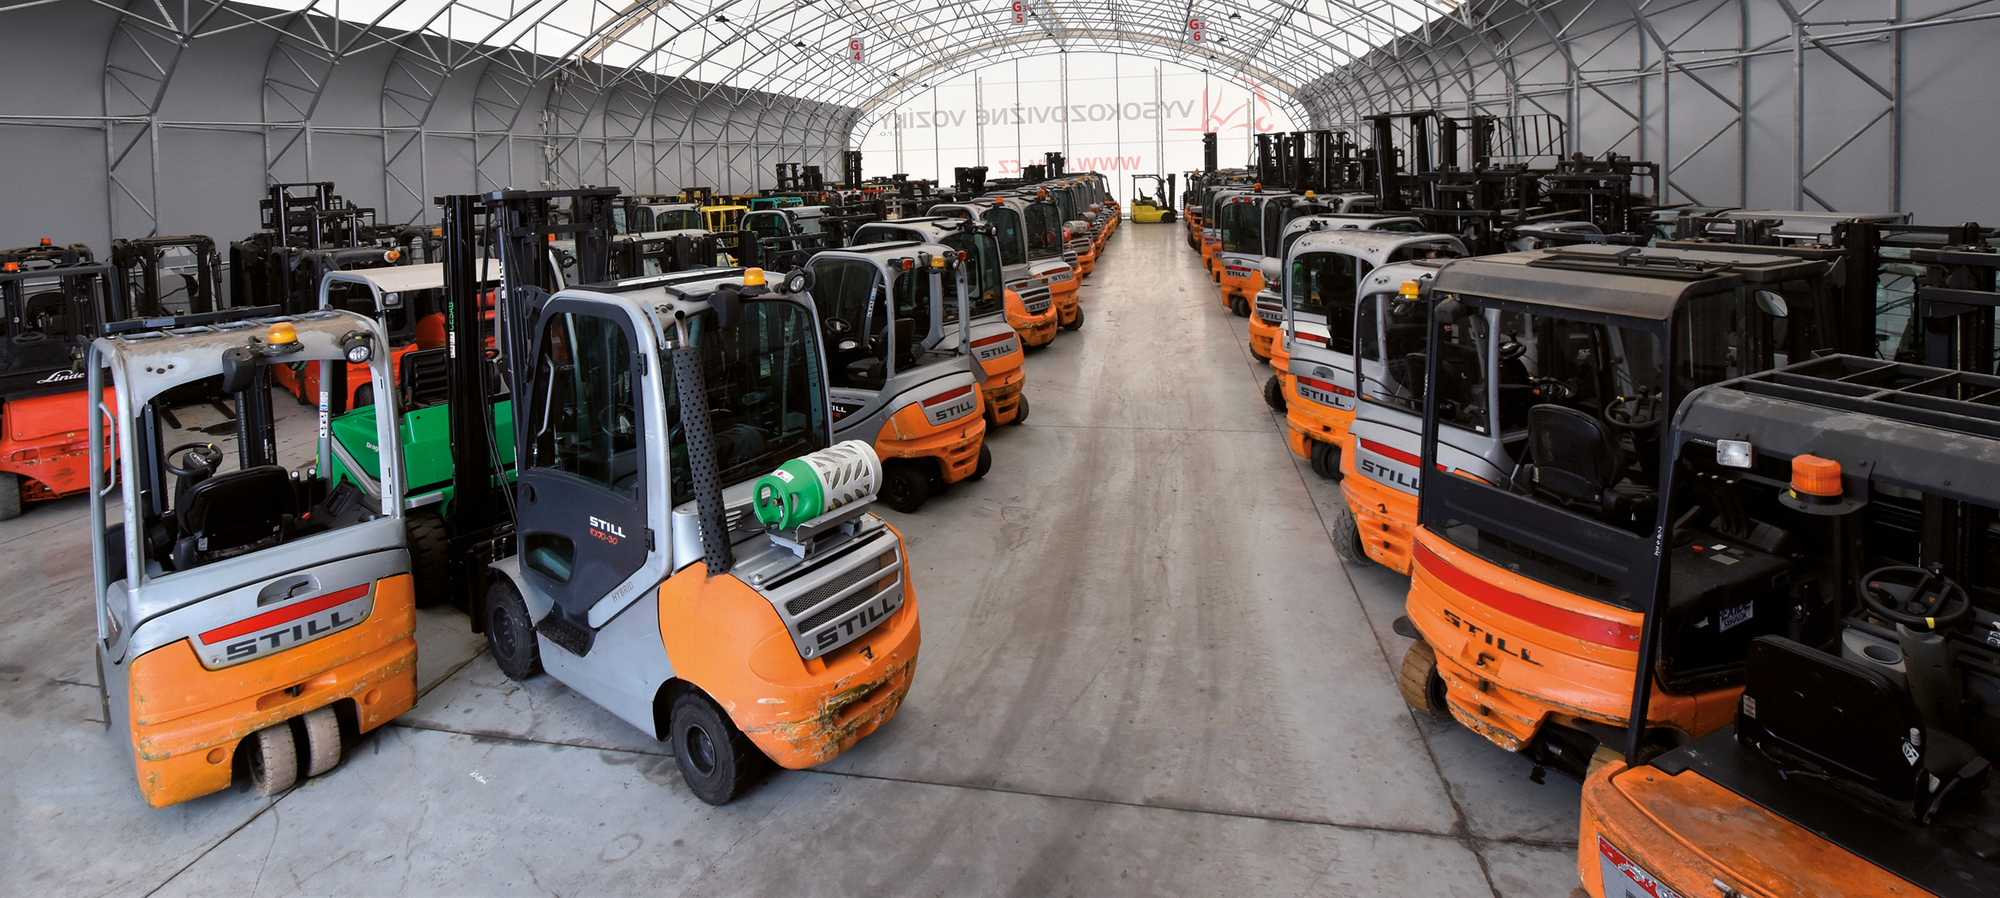 CHUF – cheap used forklifts undefined: photos 6